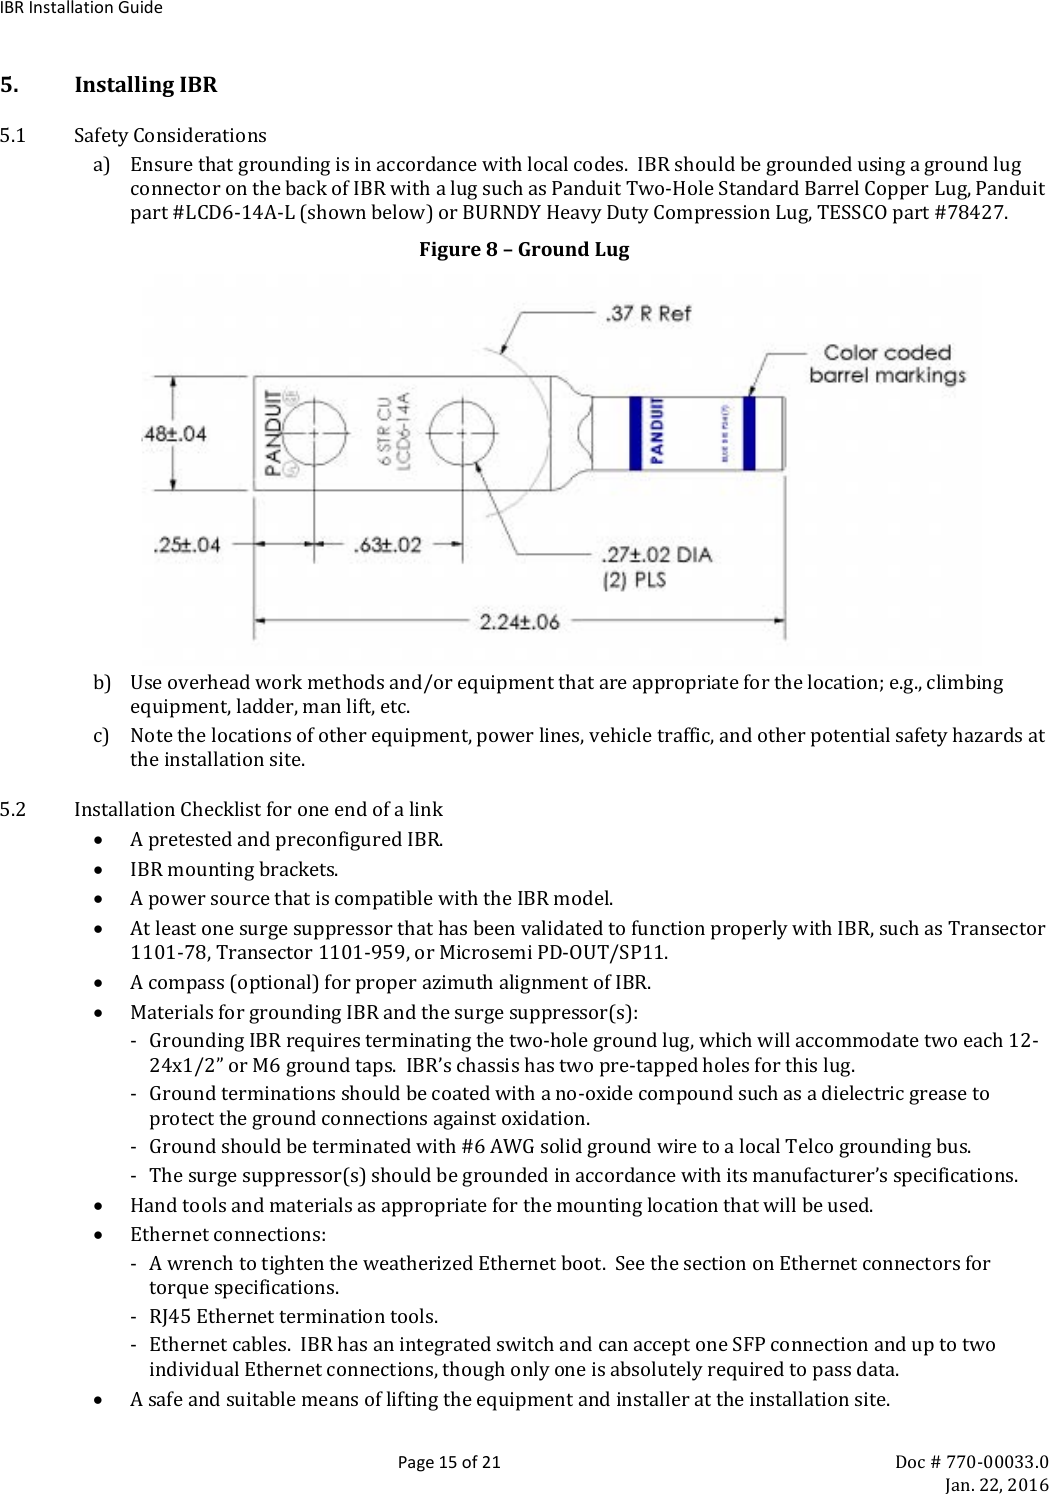 IBR Installation Guide  Page 15 of 21 Doc # 770-00033.0     Jan. 22, 2016 5. Installing IBR 5.1 Safety Considerations a) Ensure that grounding is in accordance with local codes.  IBR should be grounded using a ground lug connector on the back of IBR with a lug such as Panduit Two-Hole Standard Barrel Copper Lug, Panduit part #LCD6-14A-L (shown below) or BURNDY Heavy Duty Compression Lug, TESSCO part #78427.   Figure 8 – Ground Lug  b) Use overhead work methods and/or equipment that are appropriate for the location; e.g., climbing equipment, ladder, man lift, etc. c) Note the locations of other equipment, power lines, vehicle traffic, and other potential safety hazards at the installation site. 5.2 Installation Checklist for one end of a link • A pretested and preconfigured IBR.   • IBR mounting brackets. • A power source that is compatible with the IBR model. • At least one surge suppressor that has been validated to function properly with IBR, such as Transector 1101-78, Transector 1101-959, or Microsemi PD-OUT/SP11. • A compass (optional) for proper azimuth alignment of IBR. • Materials for grounding IBR and the surge suppressor(s): - Grounding IBR requires terminating the two-hole ground lug, which will accommodate two each 12-24x1/2” or M6 ground taps.  IBR’s chassis has two pre-tapped holes for this lug. - Ground terminations should be coated with a no-oxide compound such as a dielectric grease to protect the ground connections against oxidation. - Ground should be terminated with #6 AWG solid ground wire to a local Telco grounding bus. - The surge suppressor(s) should be grounded in accordance with its manufacturer’s specifications. • Hand tools and materials as appropriate for the mounting location that will be used.  • Ethernet connections: - A wrench to tighten the weatherized Ethernet boot.  See the section on Ethernet connectors for torque specifications. - RJ45 Ethernet termination tools. - Ethernet cables.  IBR has an integrated switch and can accept one SFP connection and up to two individual Ethernet connections, though only one is absolutely required to pass data. • A safe and suitable means of lifting the equipment and installer at the installation site.  